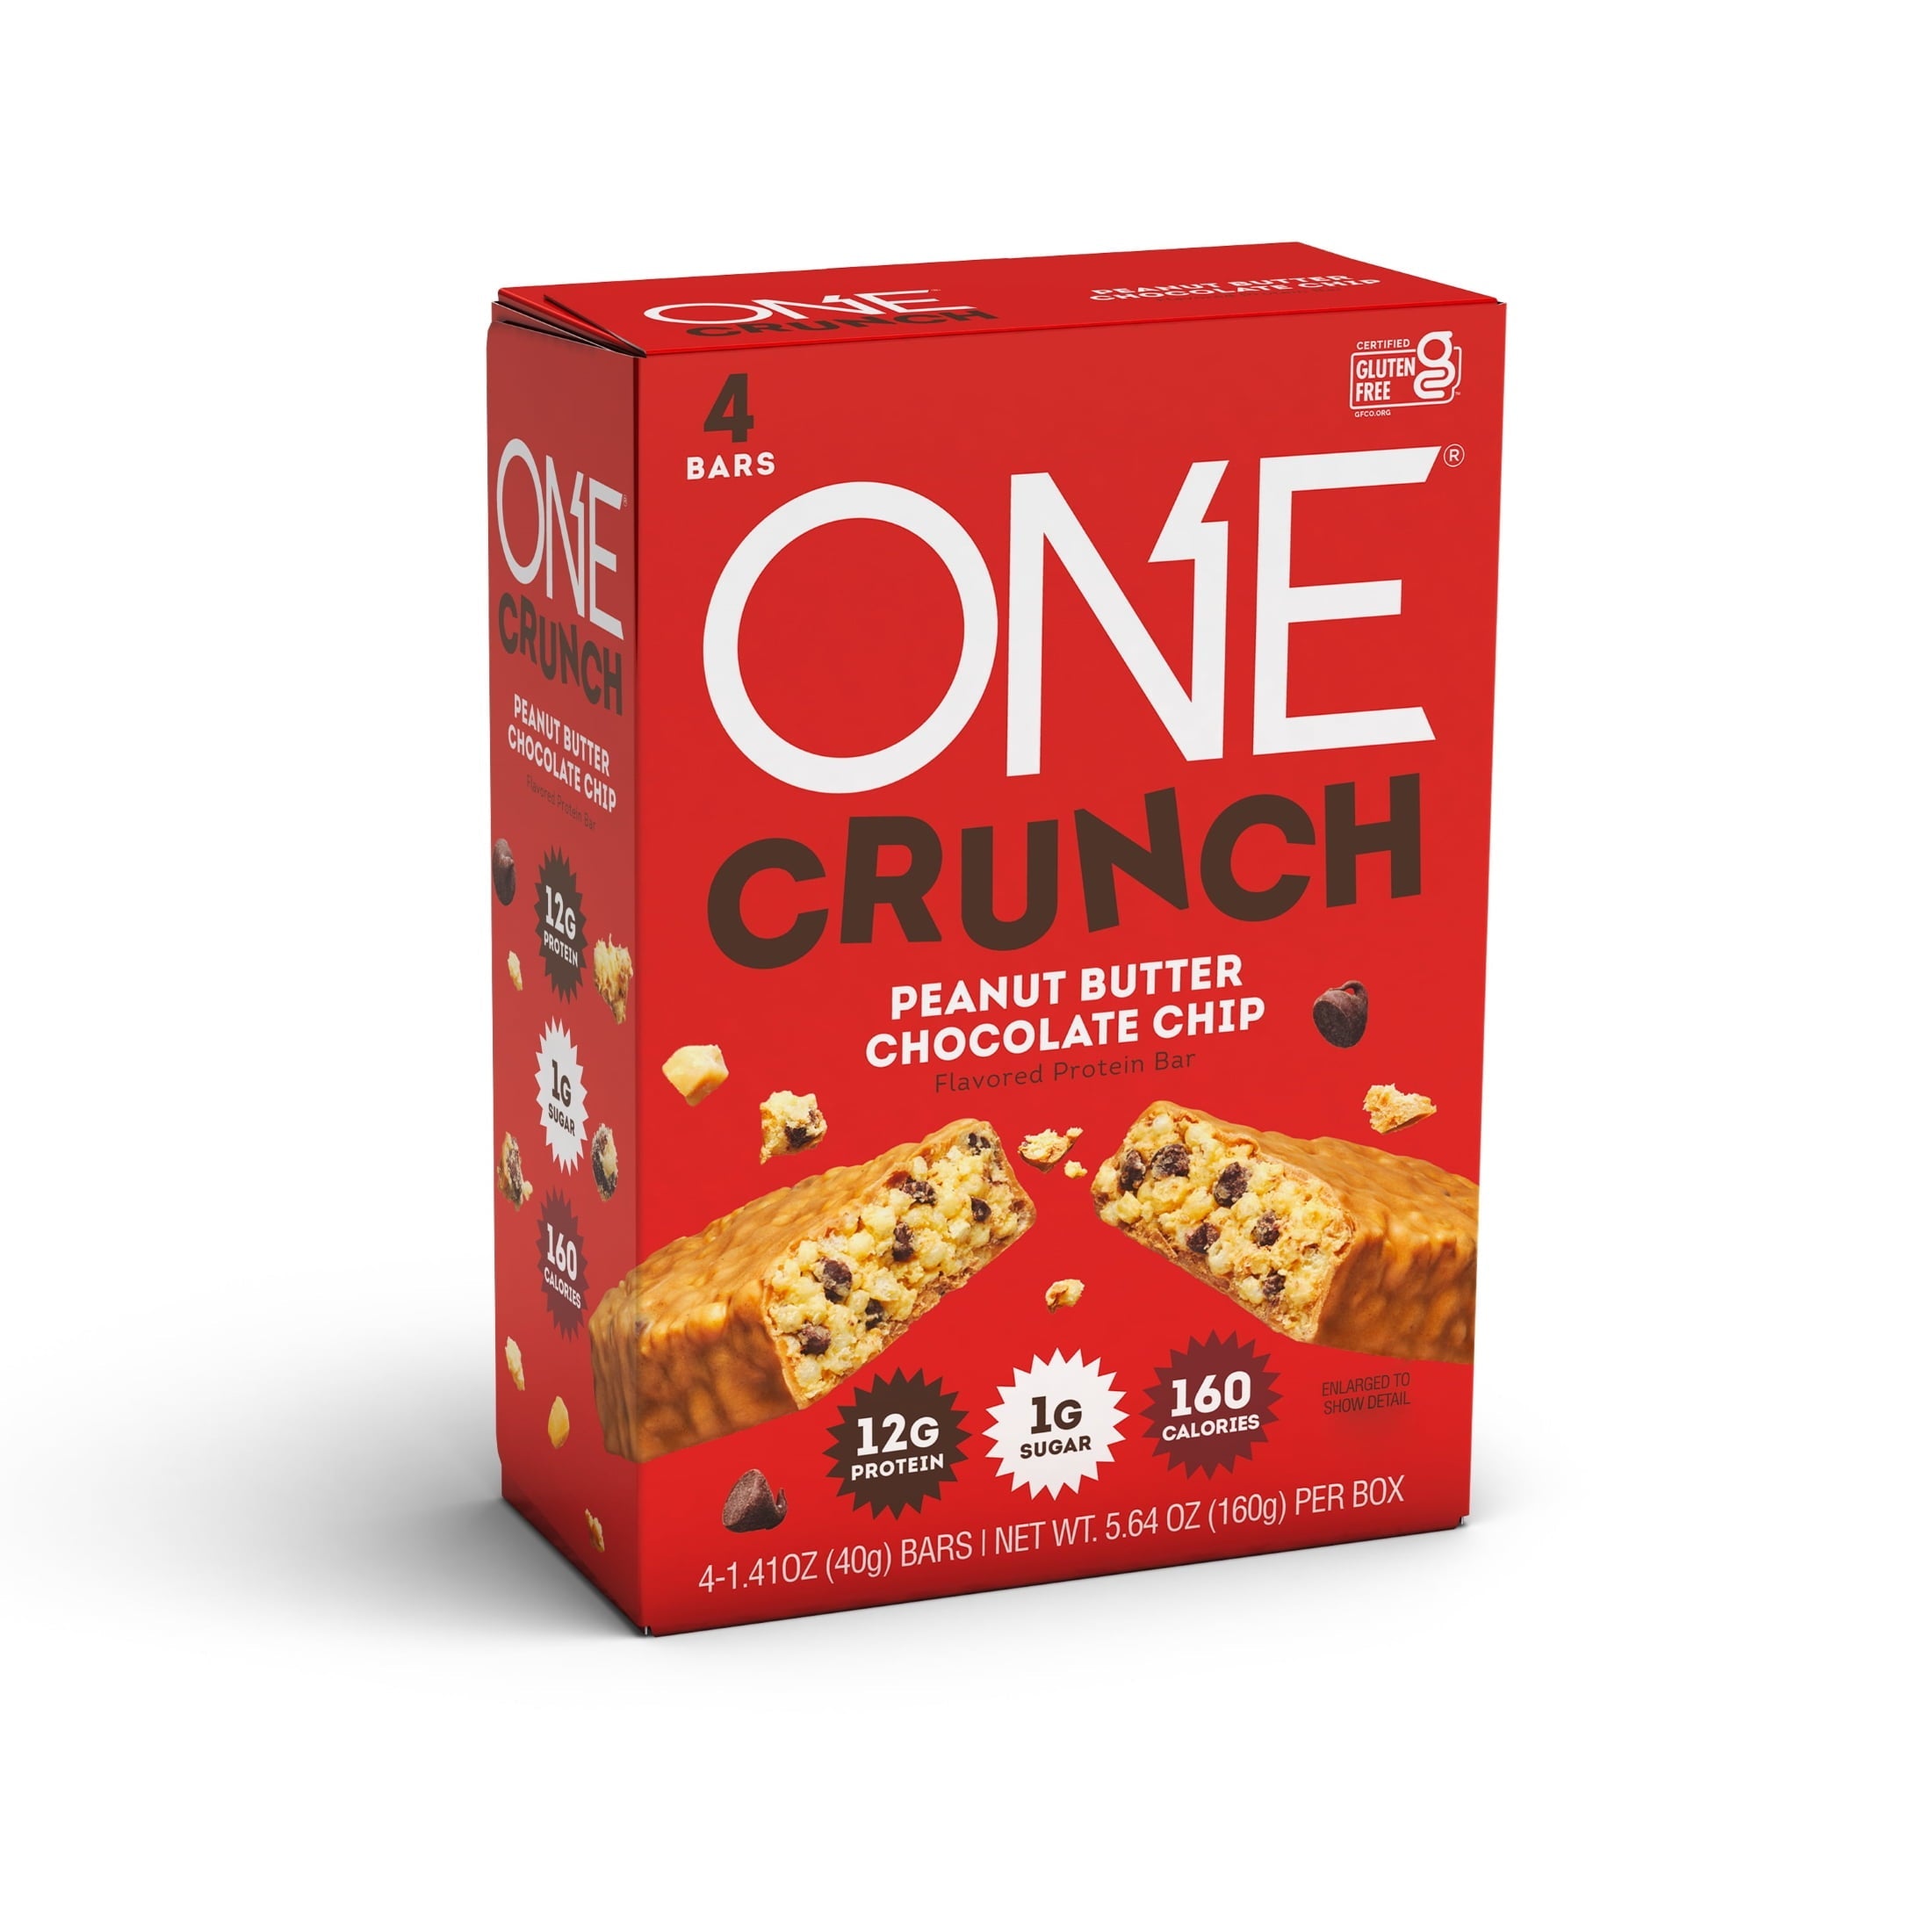 One Bar Crunch Protein Bars Peanut Butter Chocolate Chip 2.12 Oz